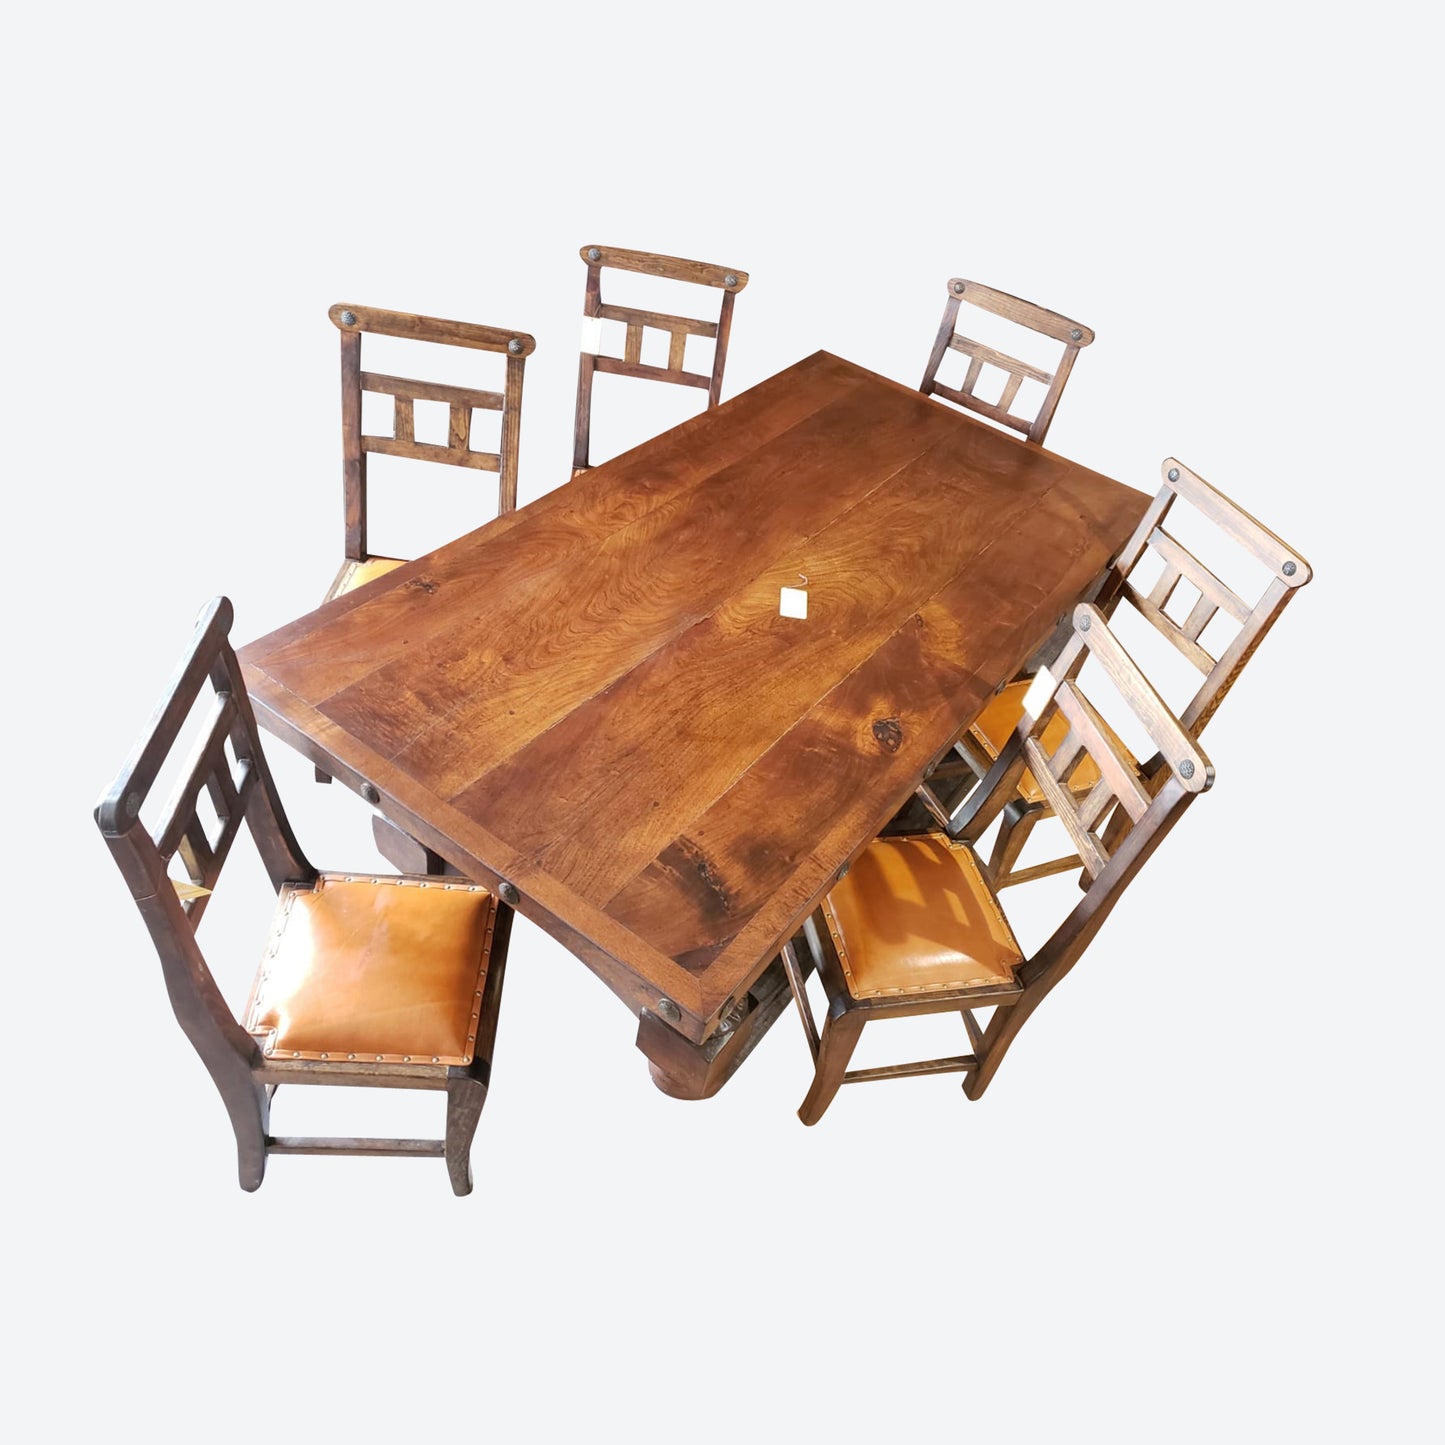 Mesquite Wood DINING TABLE SET WITH 6 Genuine COWHIDE CHAIRS [PATINA BROWN--SK) (SKU 1073)